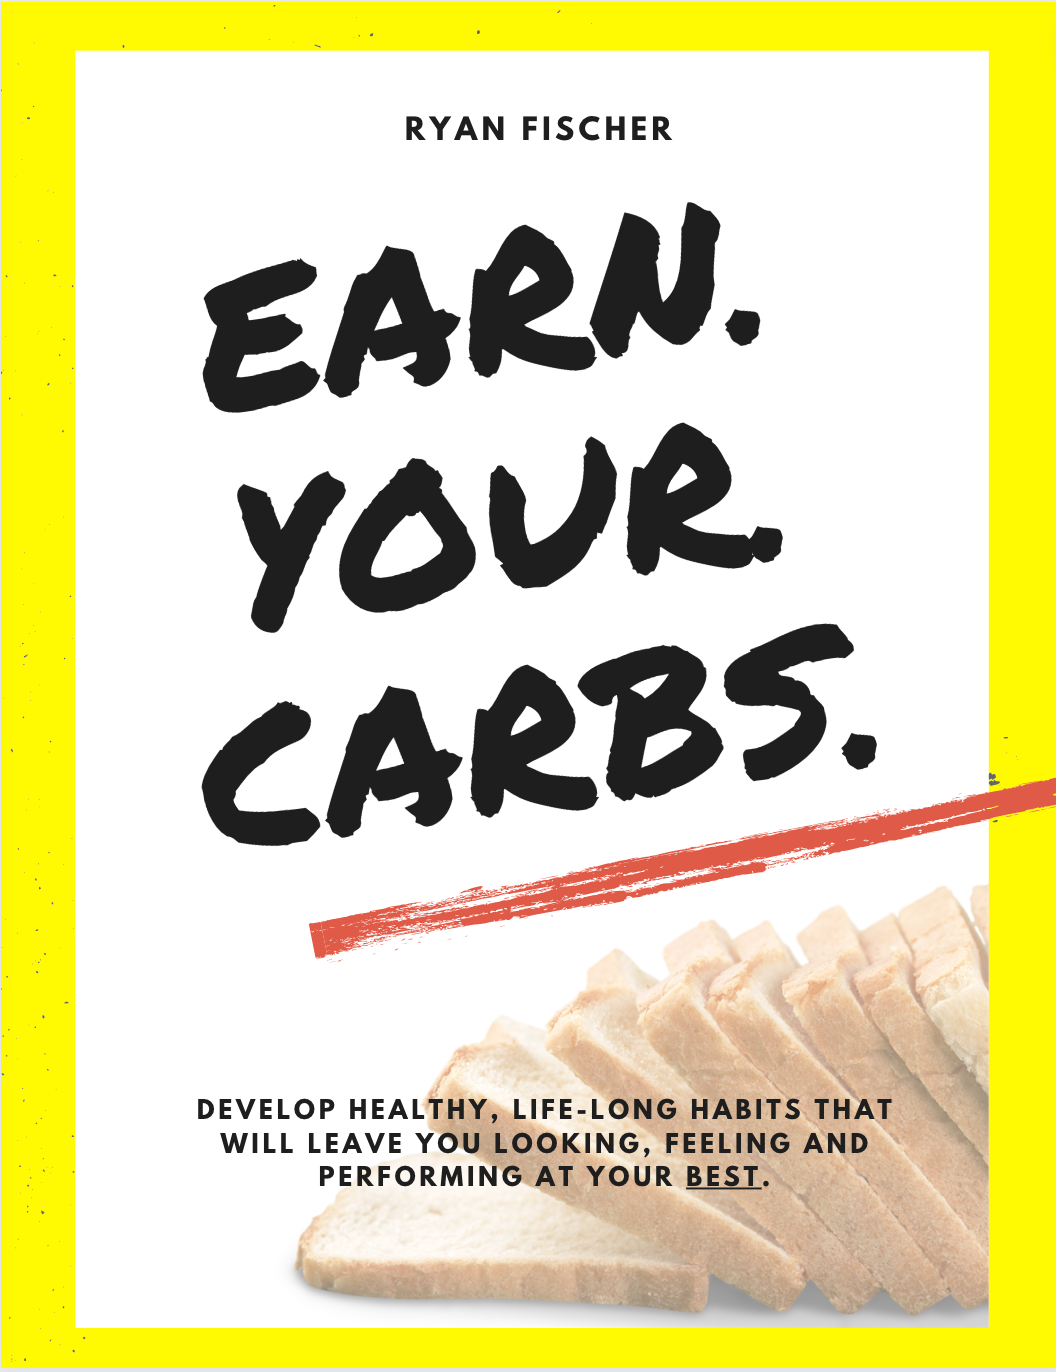 THE EARN YOUR CARBS CHALLENGE STARTS NOW!